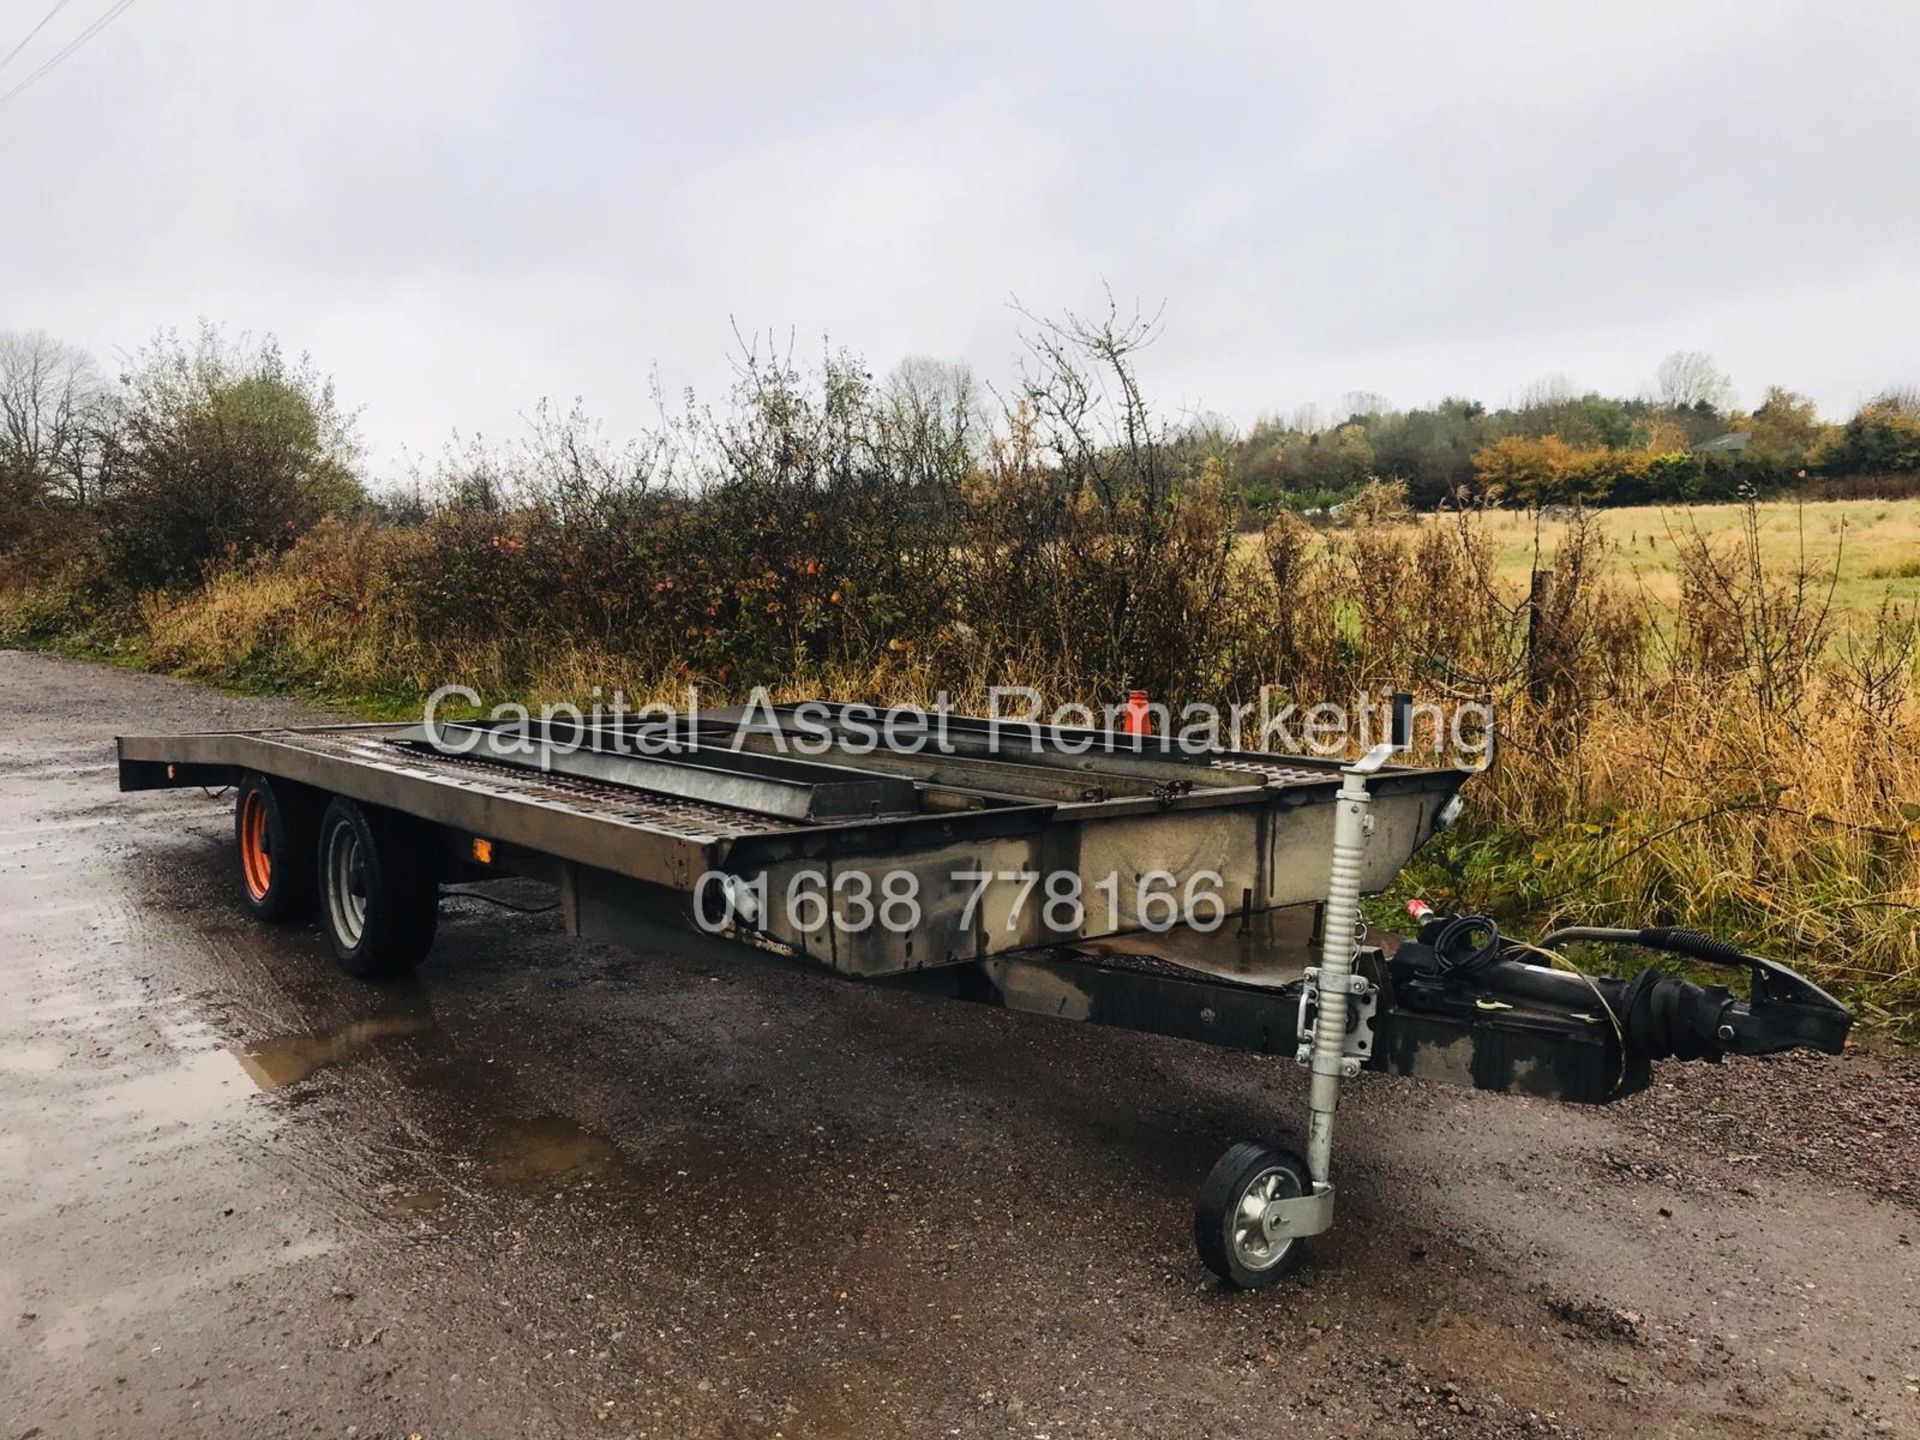 BRIAN JAMES TYPE CAR TRANSPORTER / RECOVERY TRAILER - TWIN AXEL - 1 OWNER - NO VAT!!!